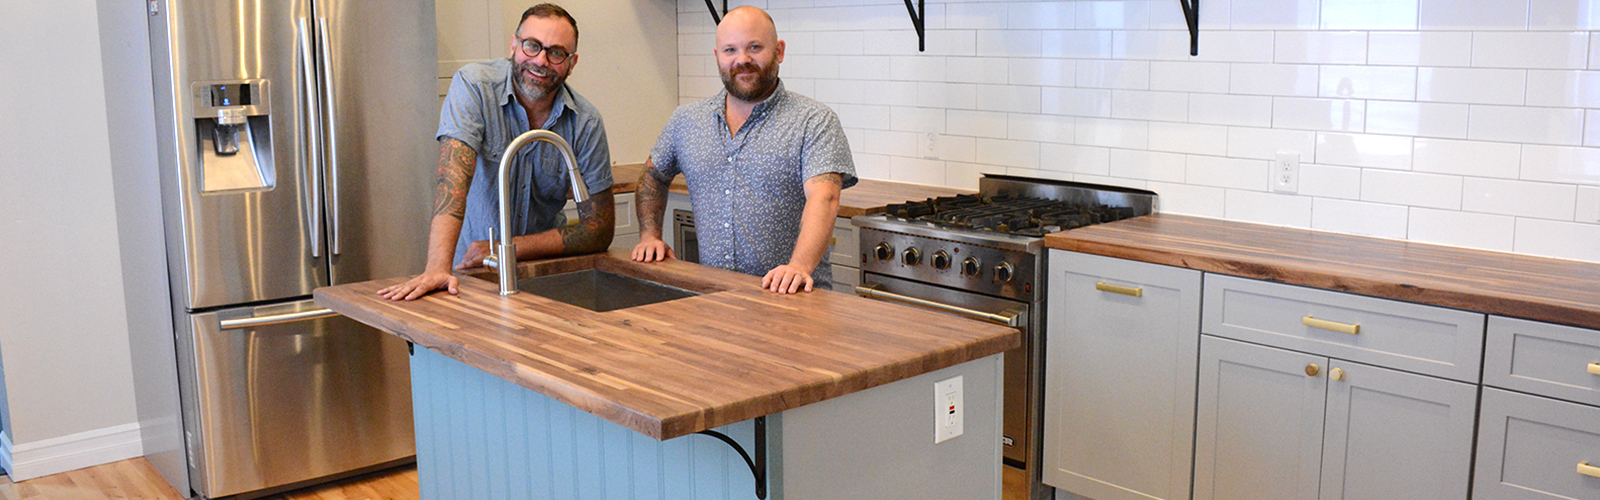 Keith Szczygiel and Sean Wrafter paired up on a few projects as solo entrepreneurs before launching their joint company, Acme Cabinet.